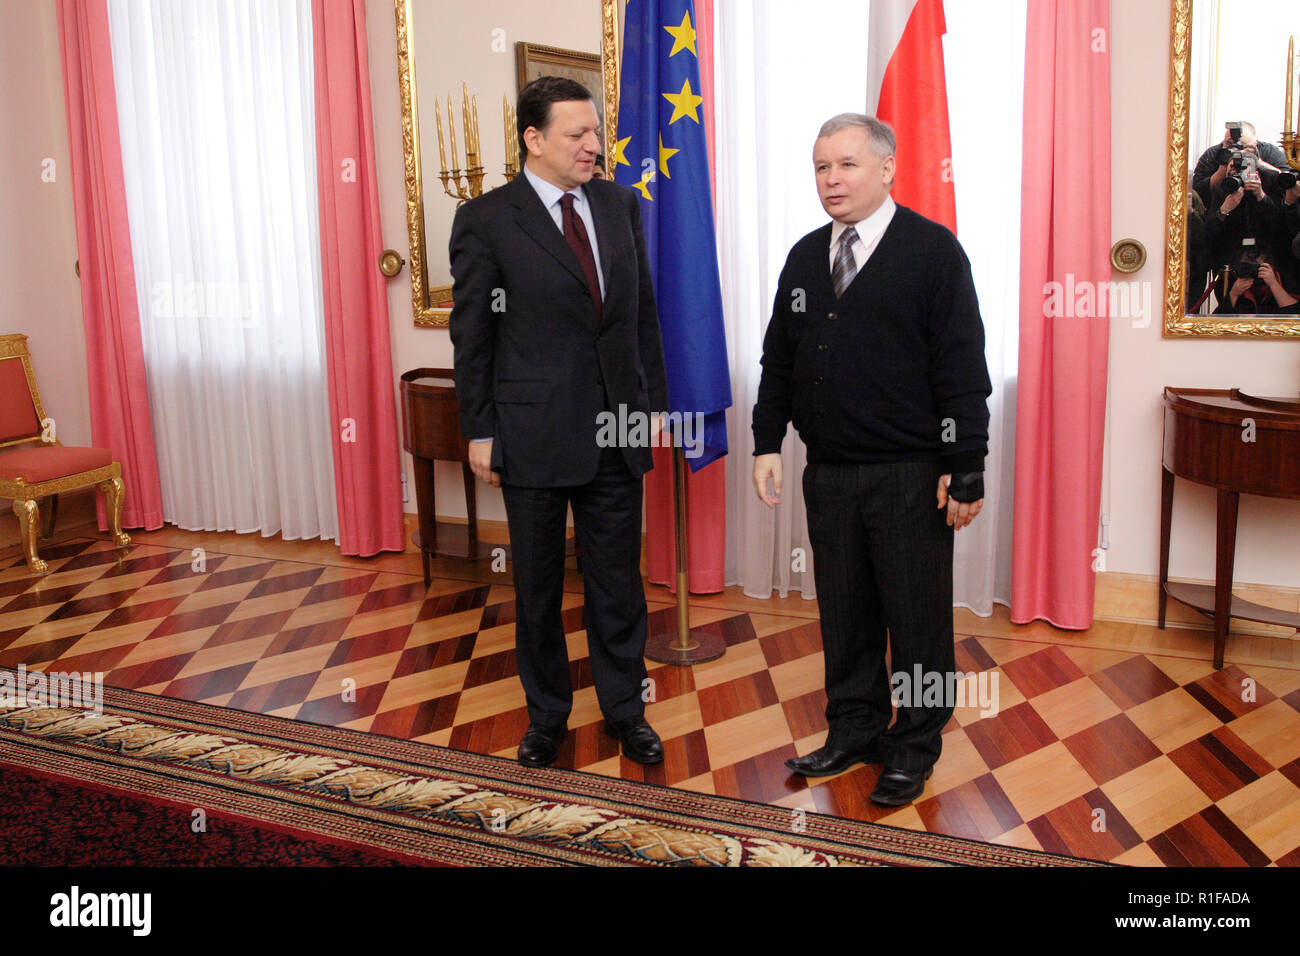 Warsaw, Mazovia / Poland - 2007/02/10: Jose Manuel Barroso, European Commission Governor, during an official meeting with Polish Prime Minister Jarosl Stock Photo